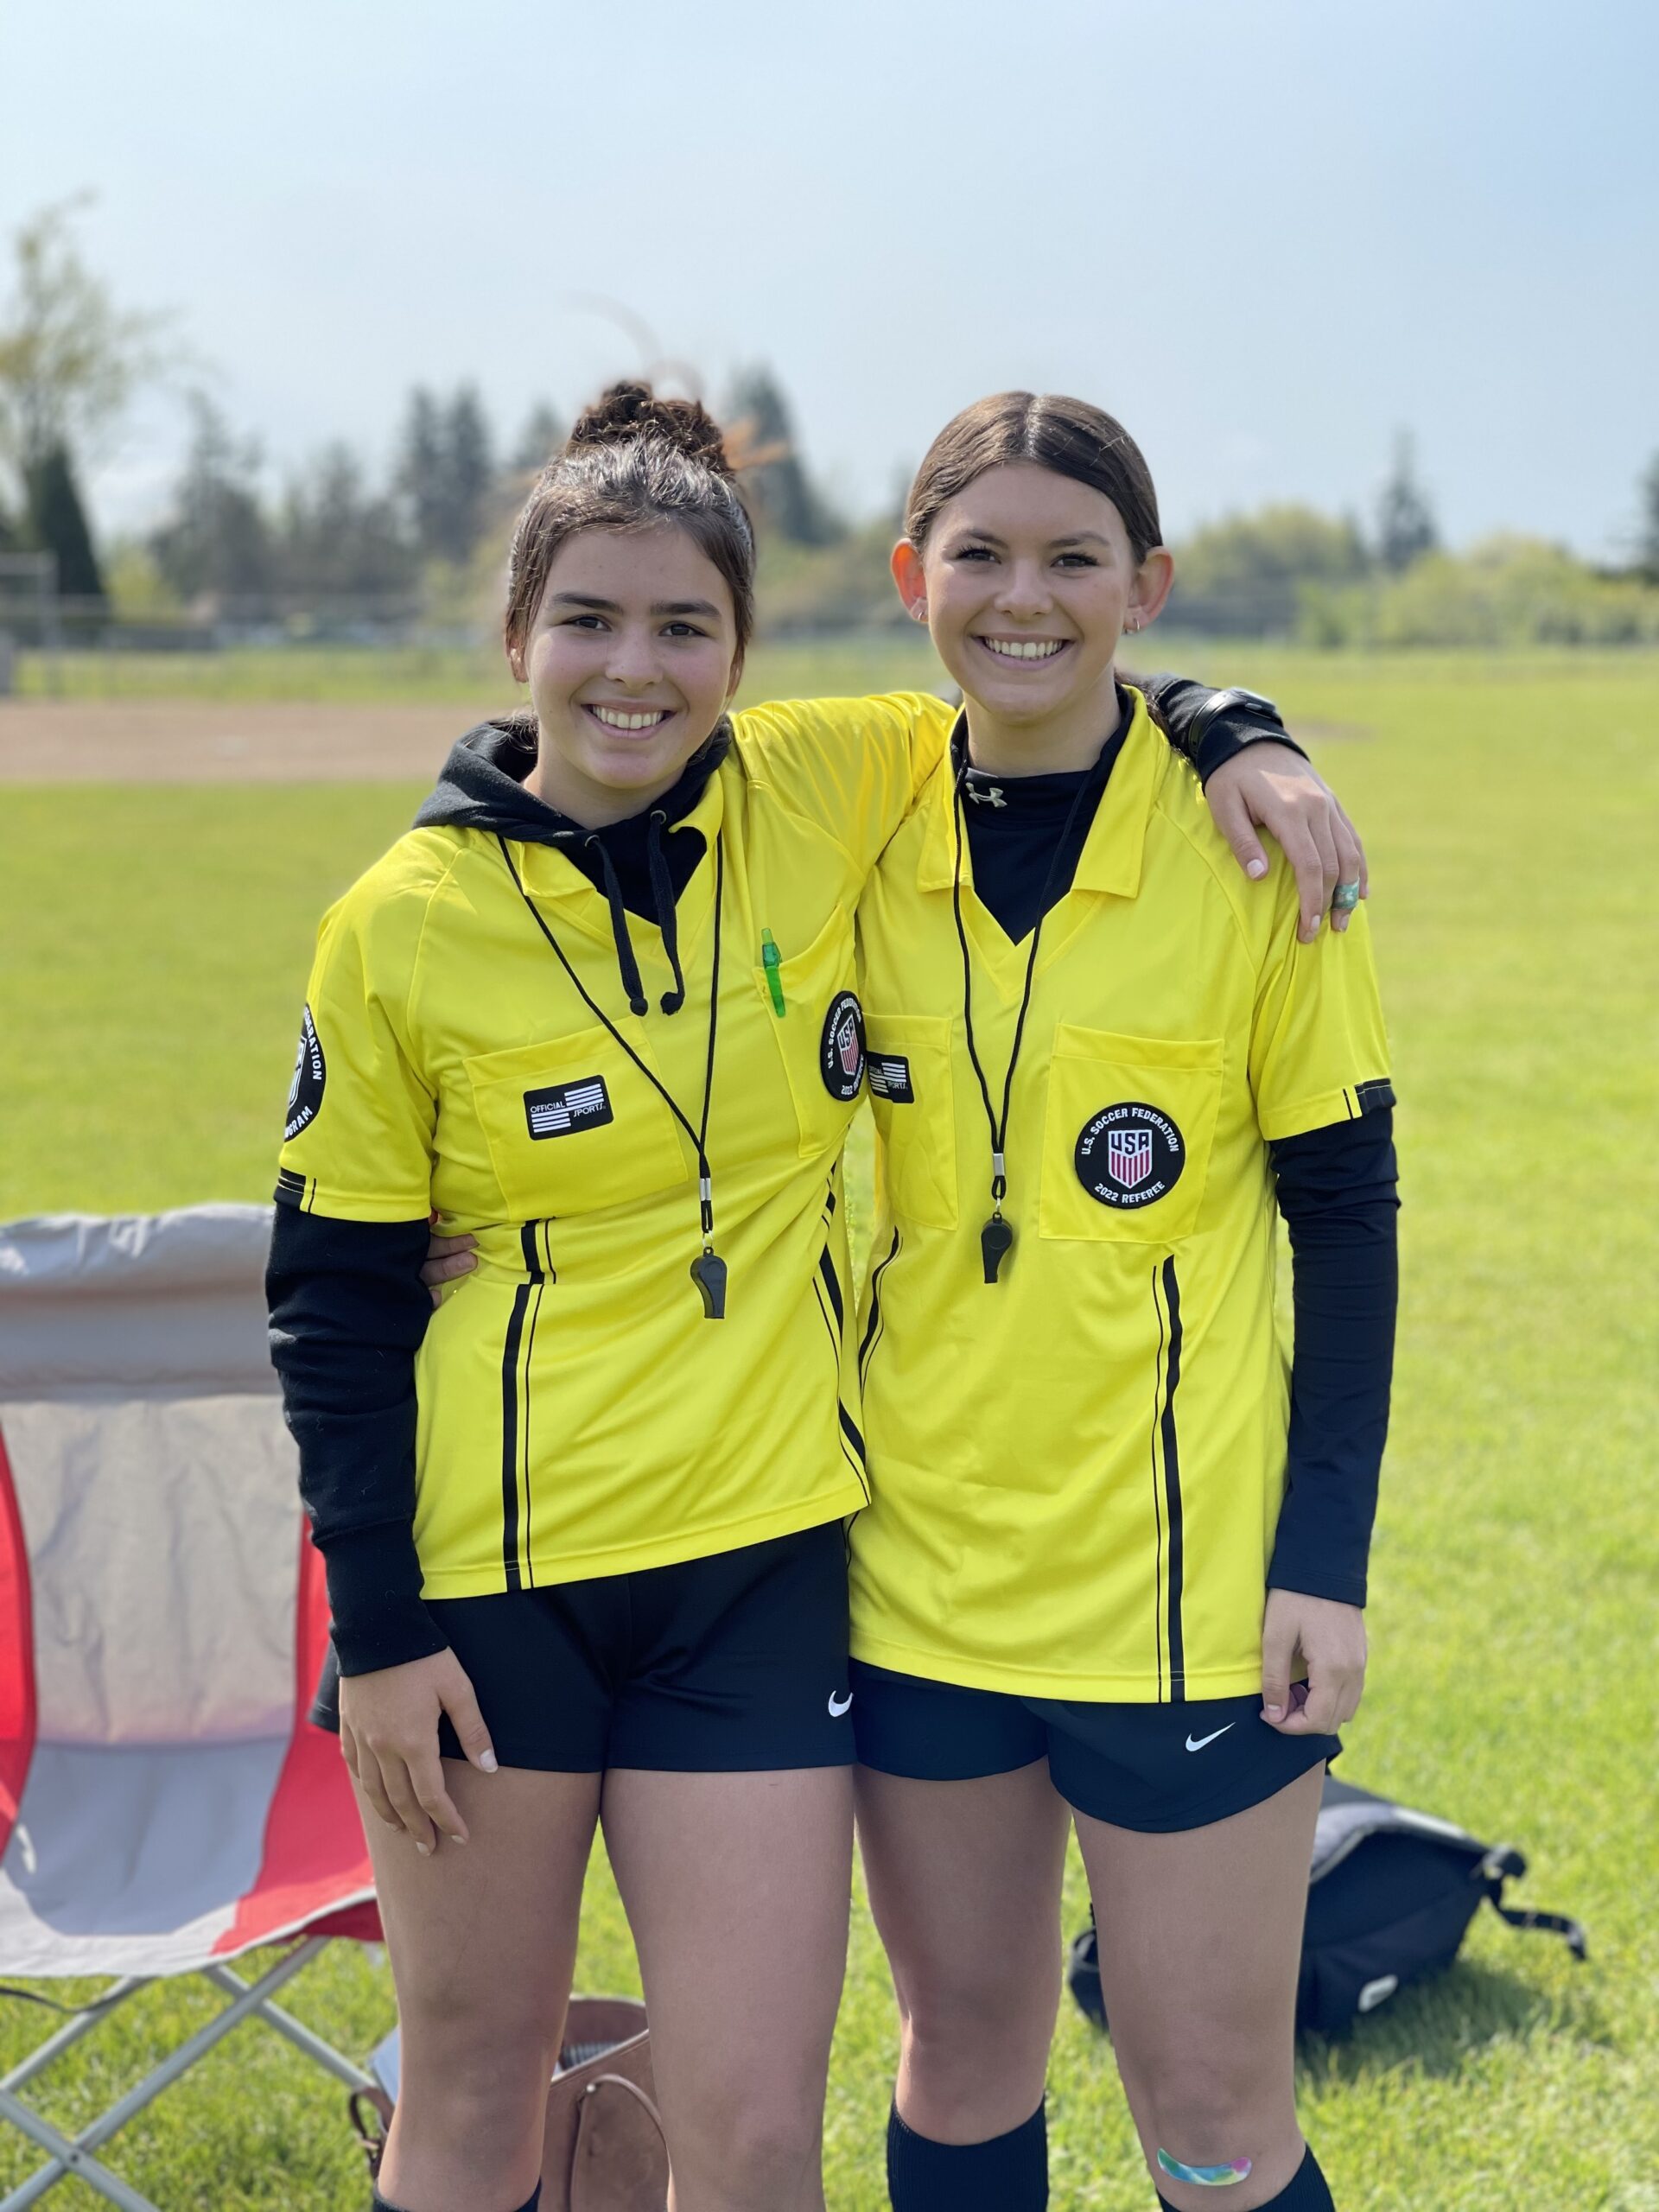 Two female referees in yellow smiling together